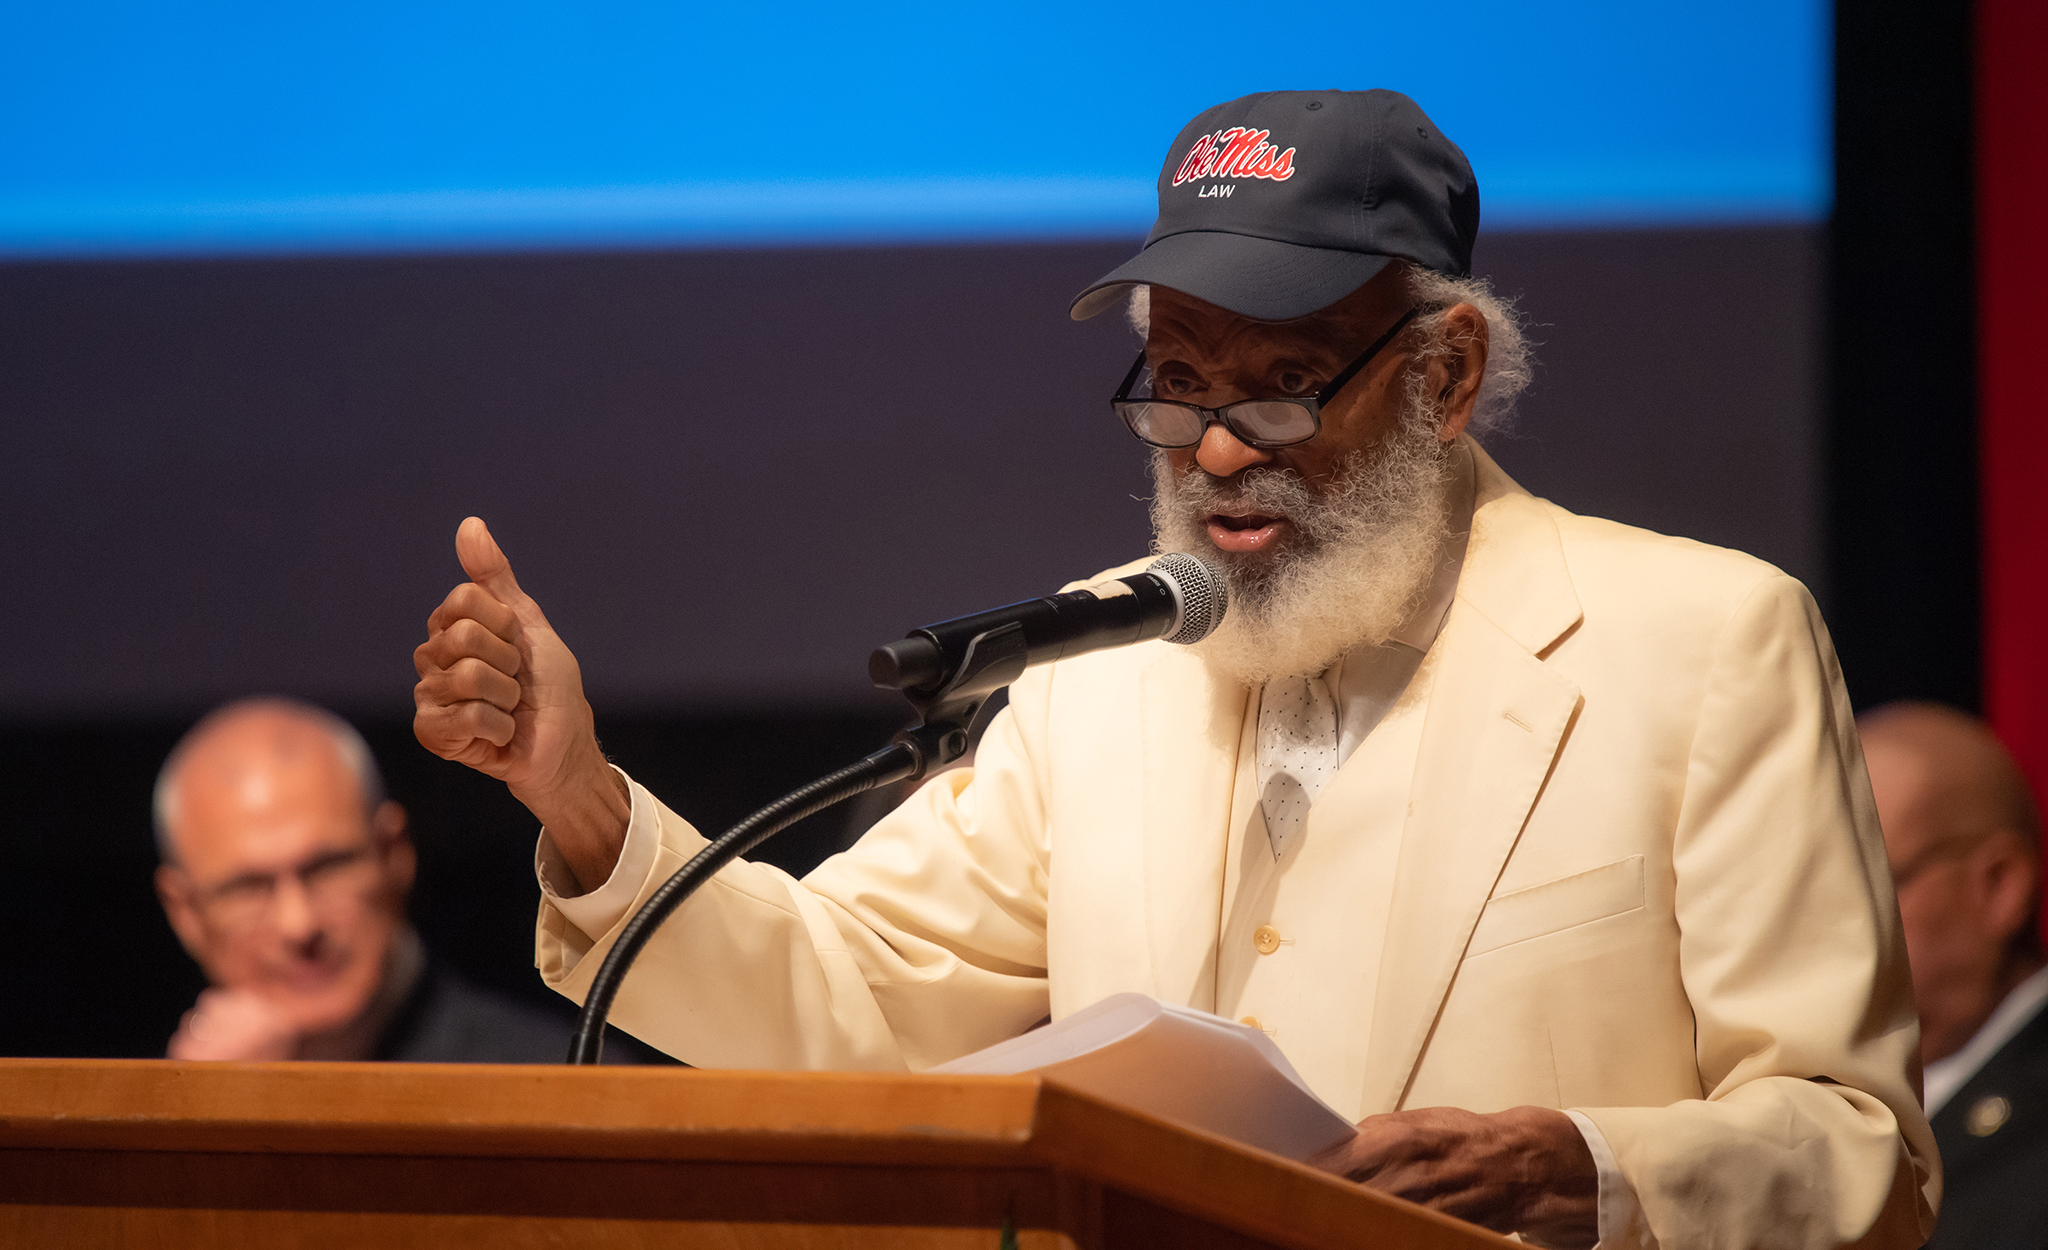 James Meredith speaks Sept. 28 during ‘The Mission Continues: Building Upon the Legacy,’ a signature event honoring the 60th anniversary of his enrollment at the university. As part of the proceedings, officials presented Meredith with a book of nearly 100 letters from people whose lives he touched. Photo by Kevin Bain/Ole Miss Digital Imaging Services